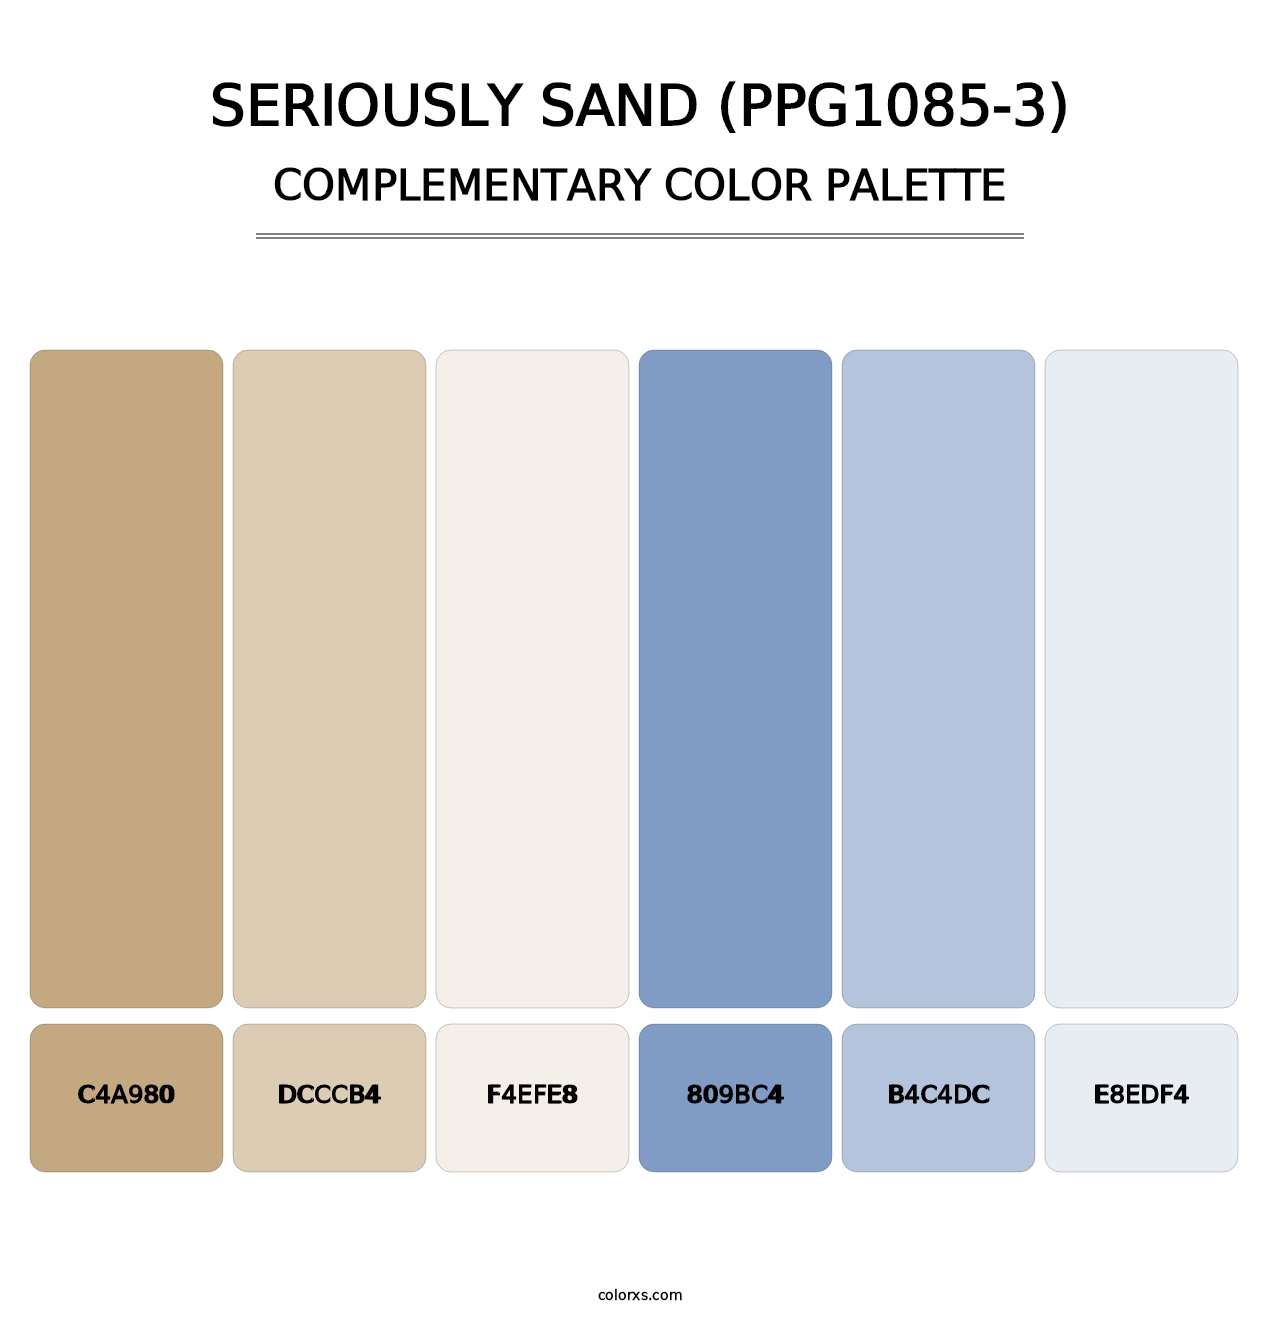 Seriously Sand (PPG1085-3) - Complementary Color Palette